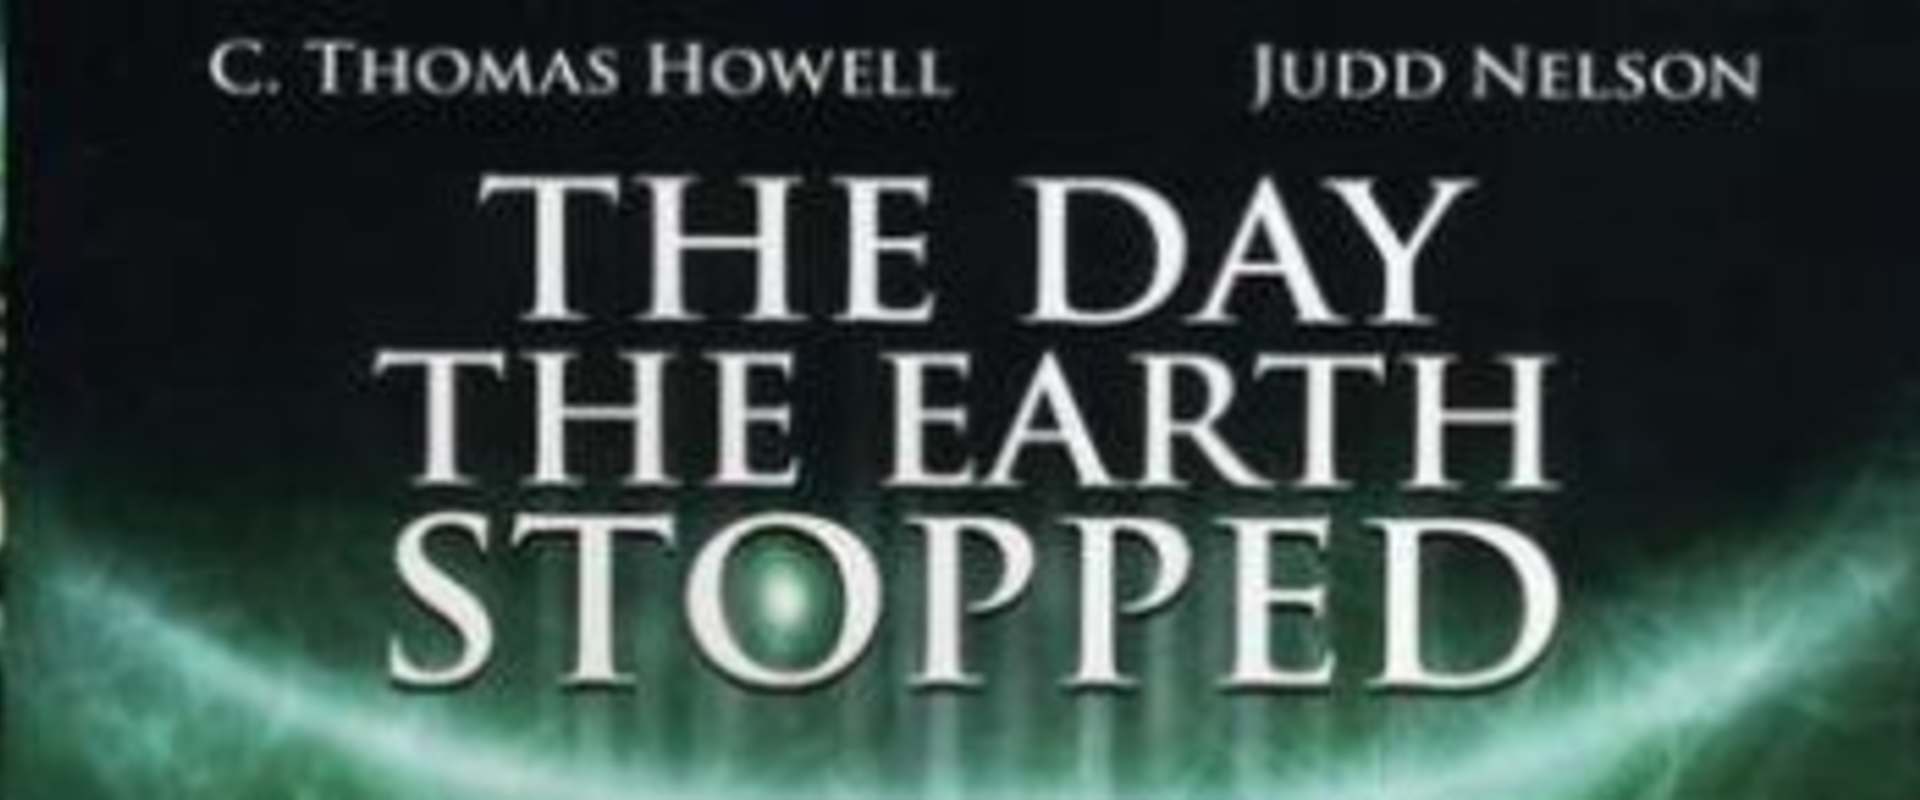 The Day the Earth Stopped background 2